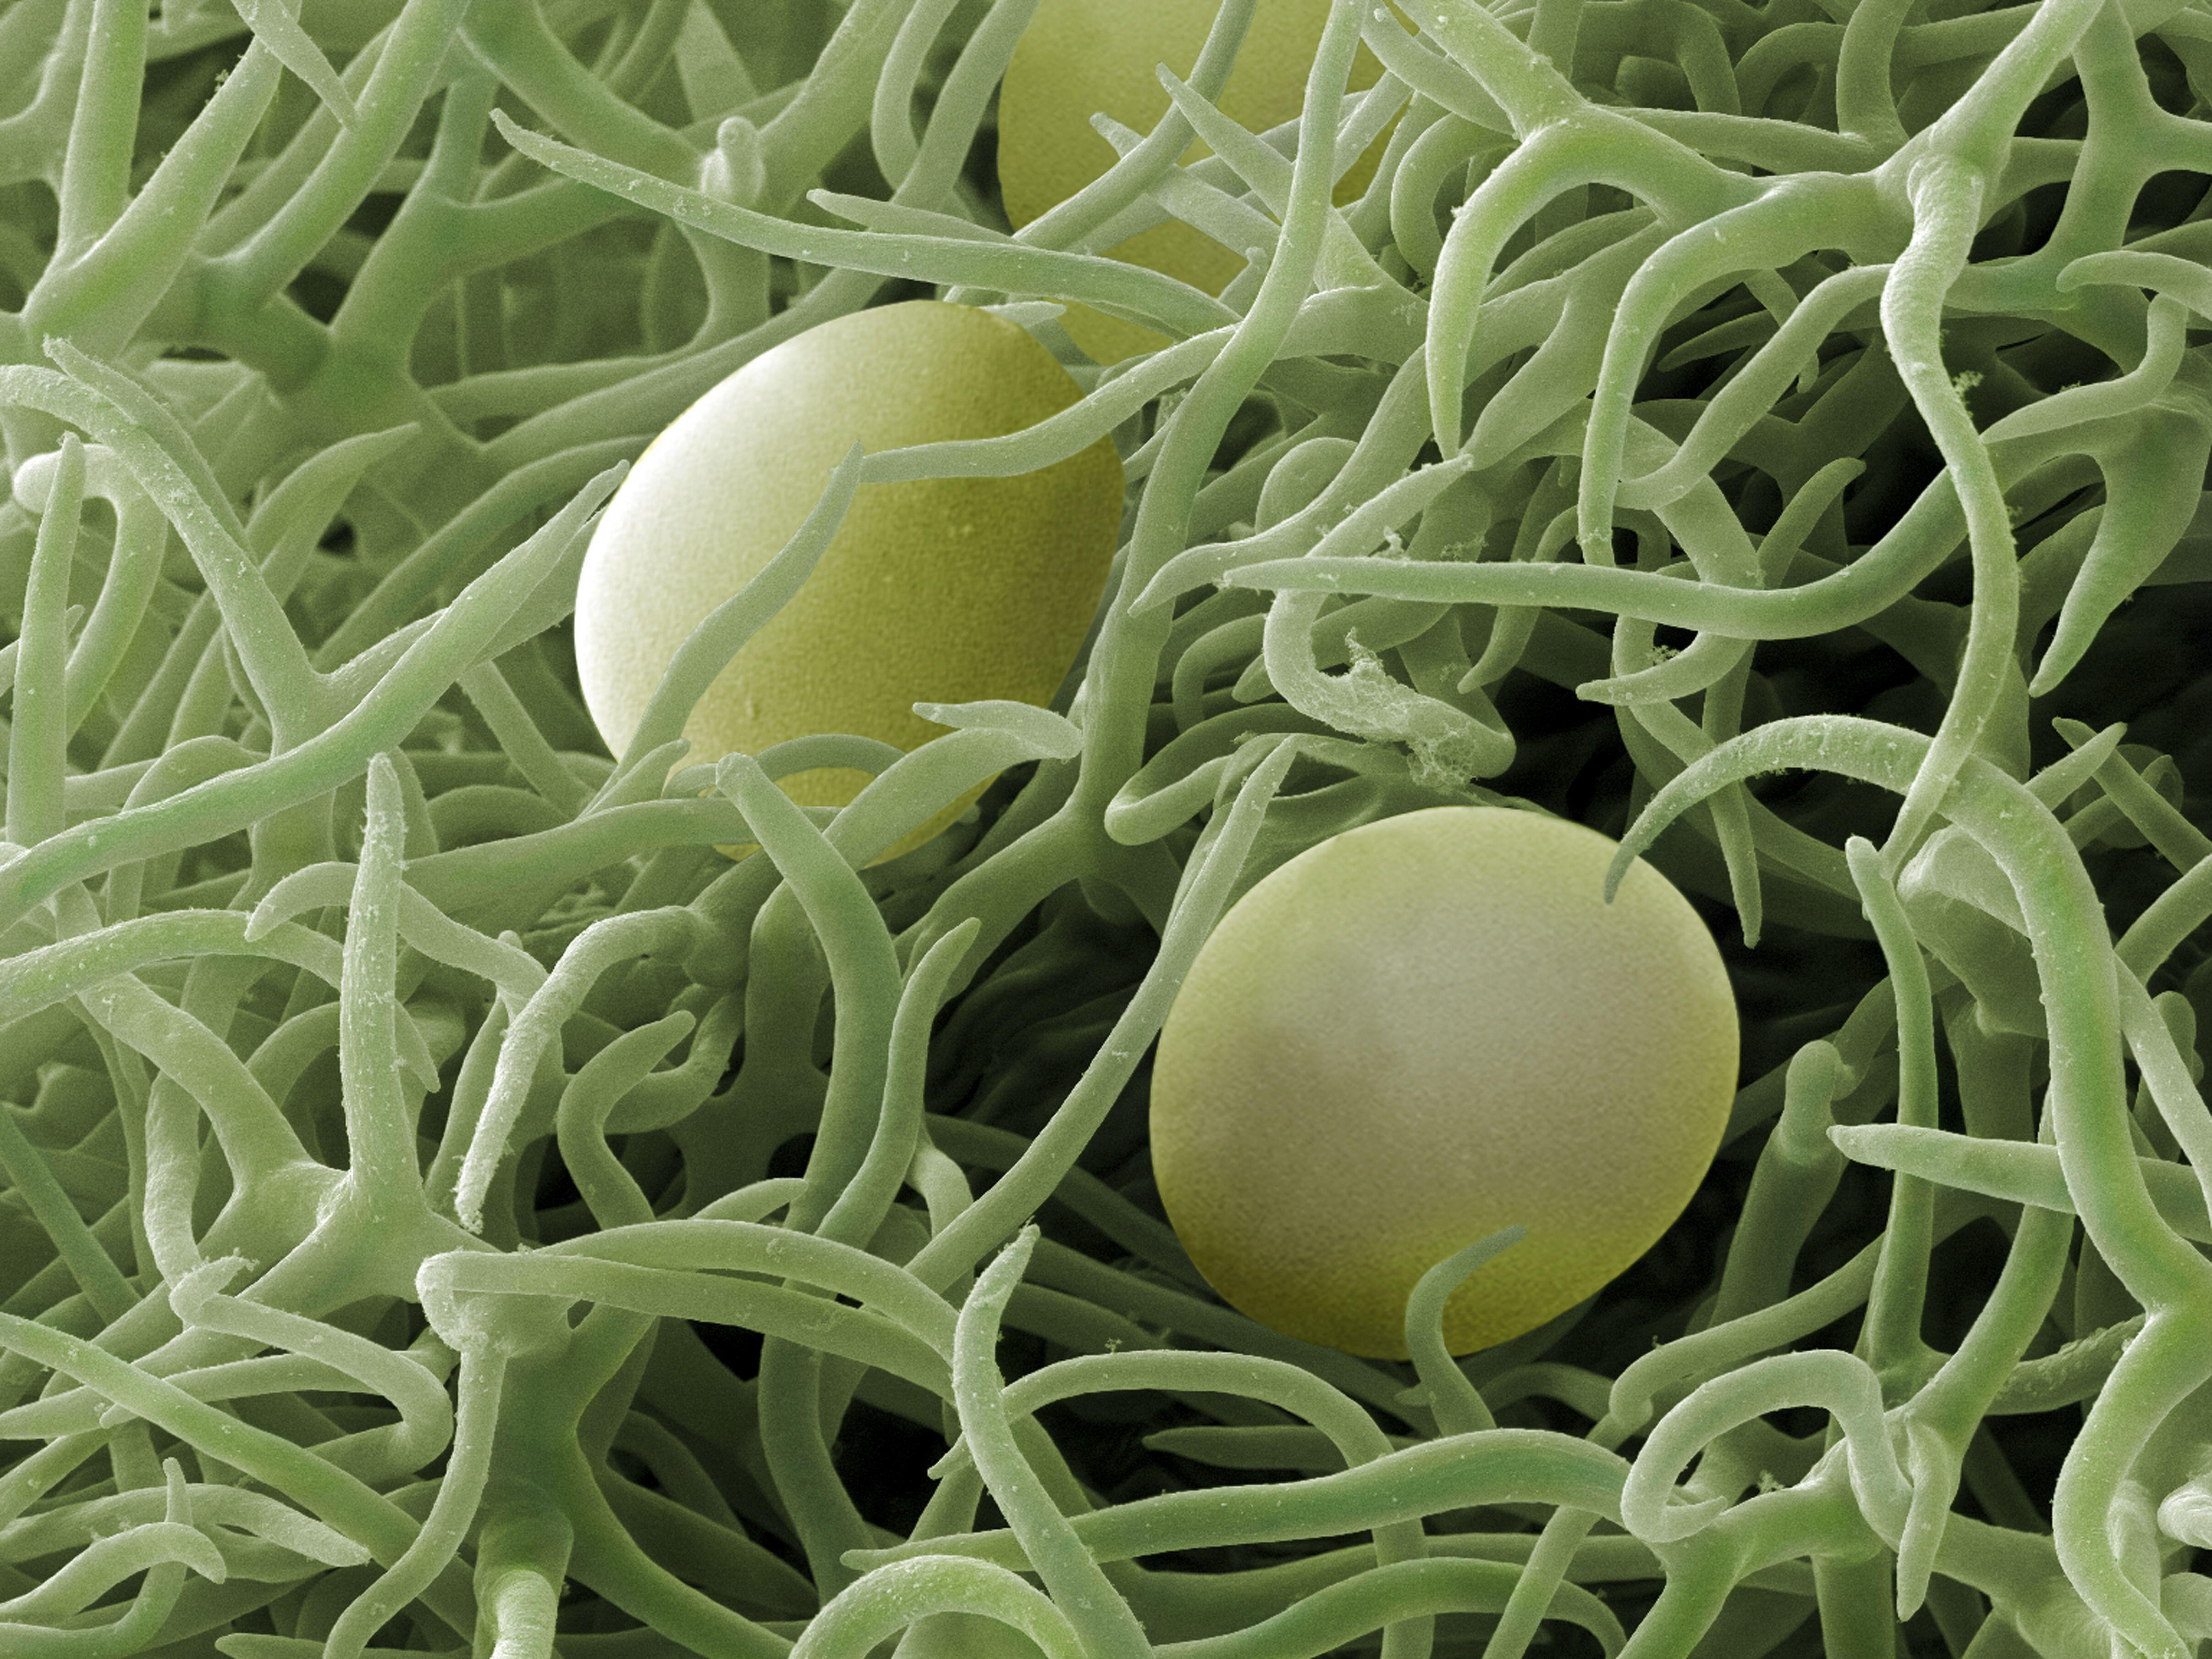 Scanning electron micrograph (SEM) of a leaf of the Rosemary plant (Rosmarinus officinalis). Spherical oil glands are found amongst the branched hairs